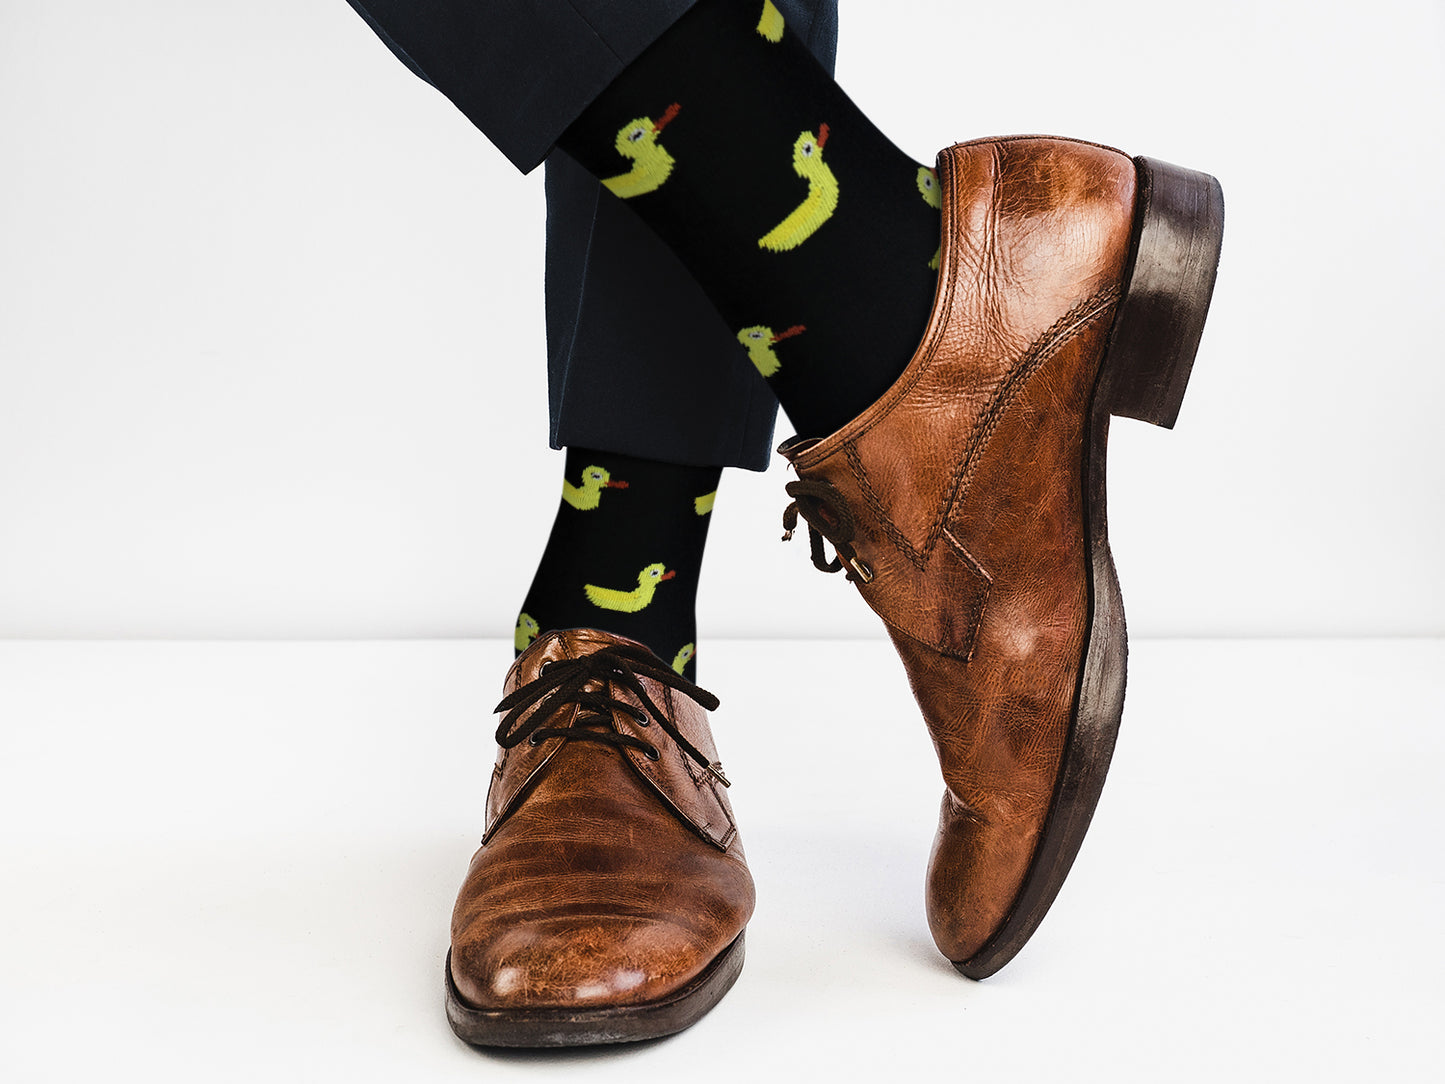 Casual Animal Socks - Yellow Duck  - for Men and Women